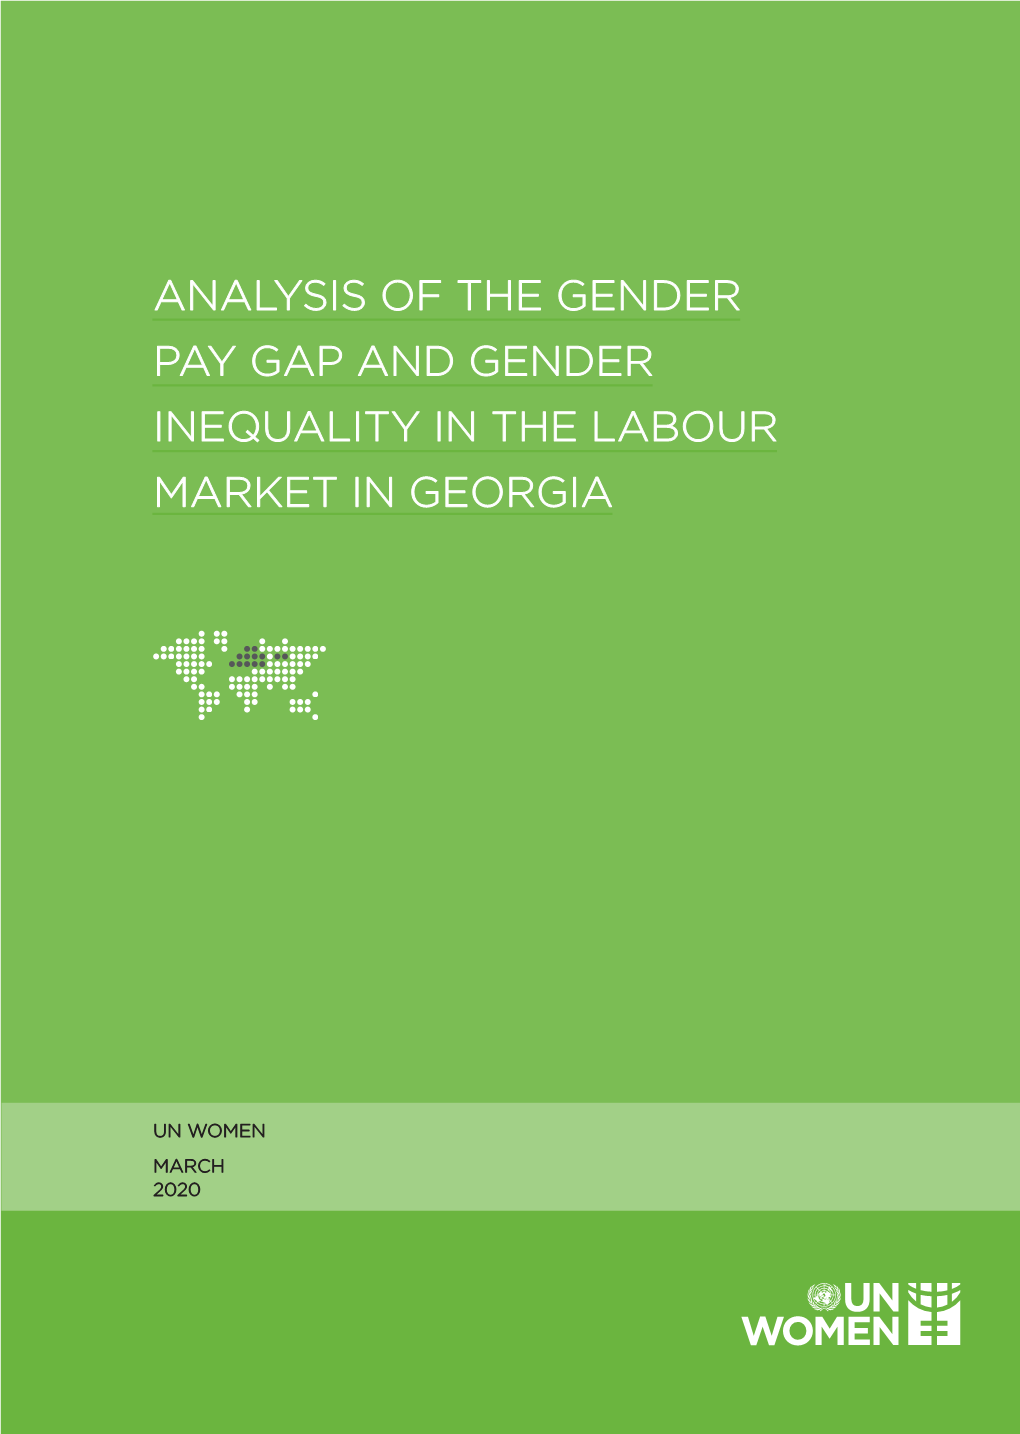 Analysis of the Gender Pay Gap and Gender Inequality in the Labour